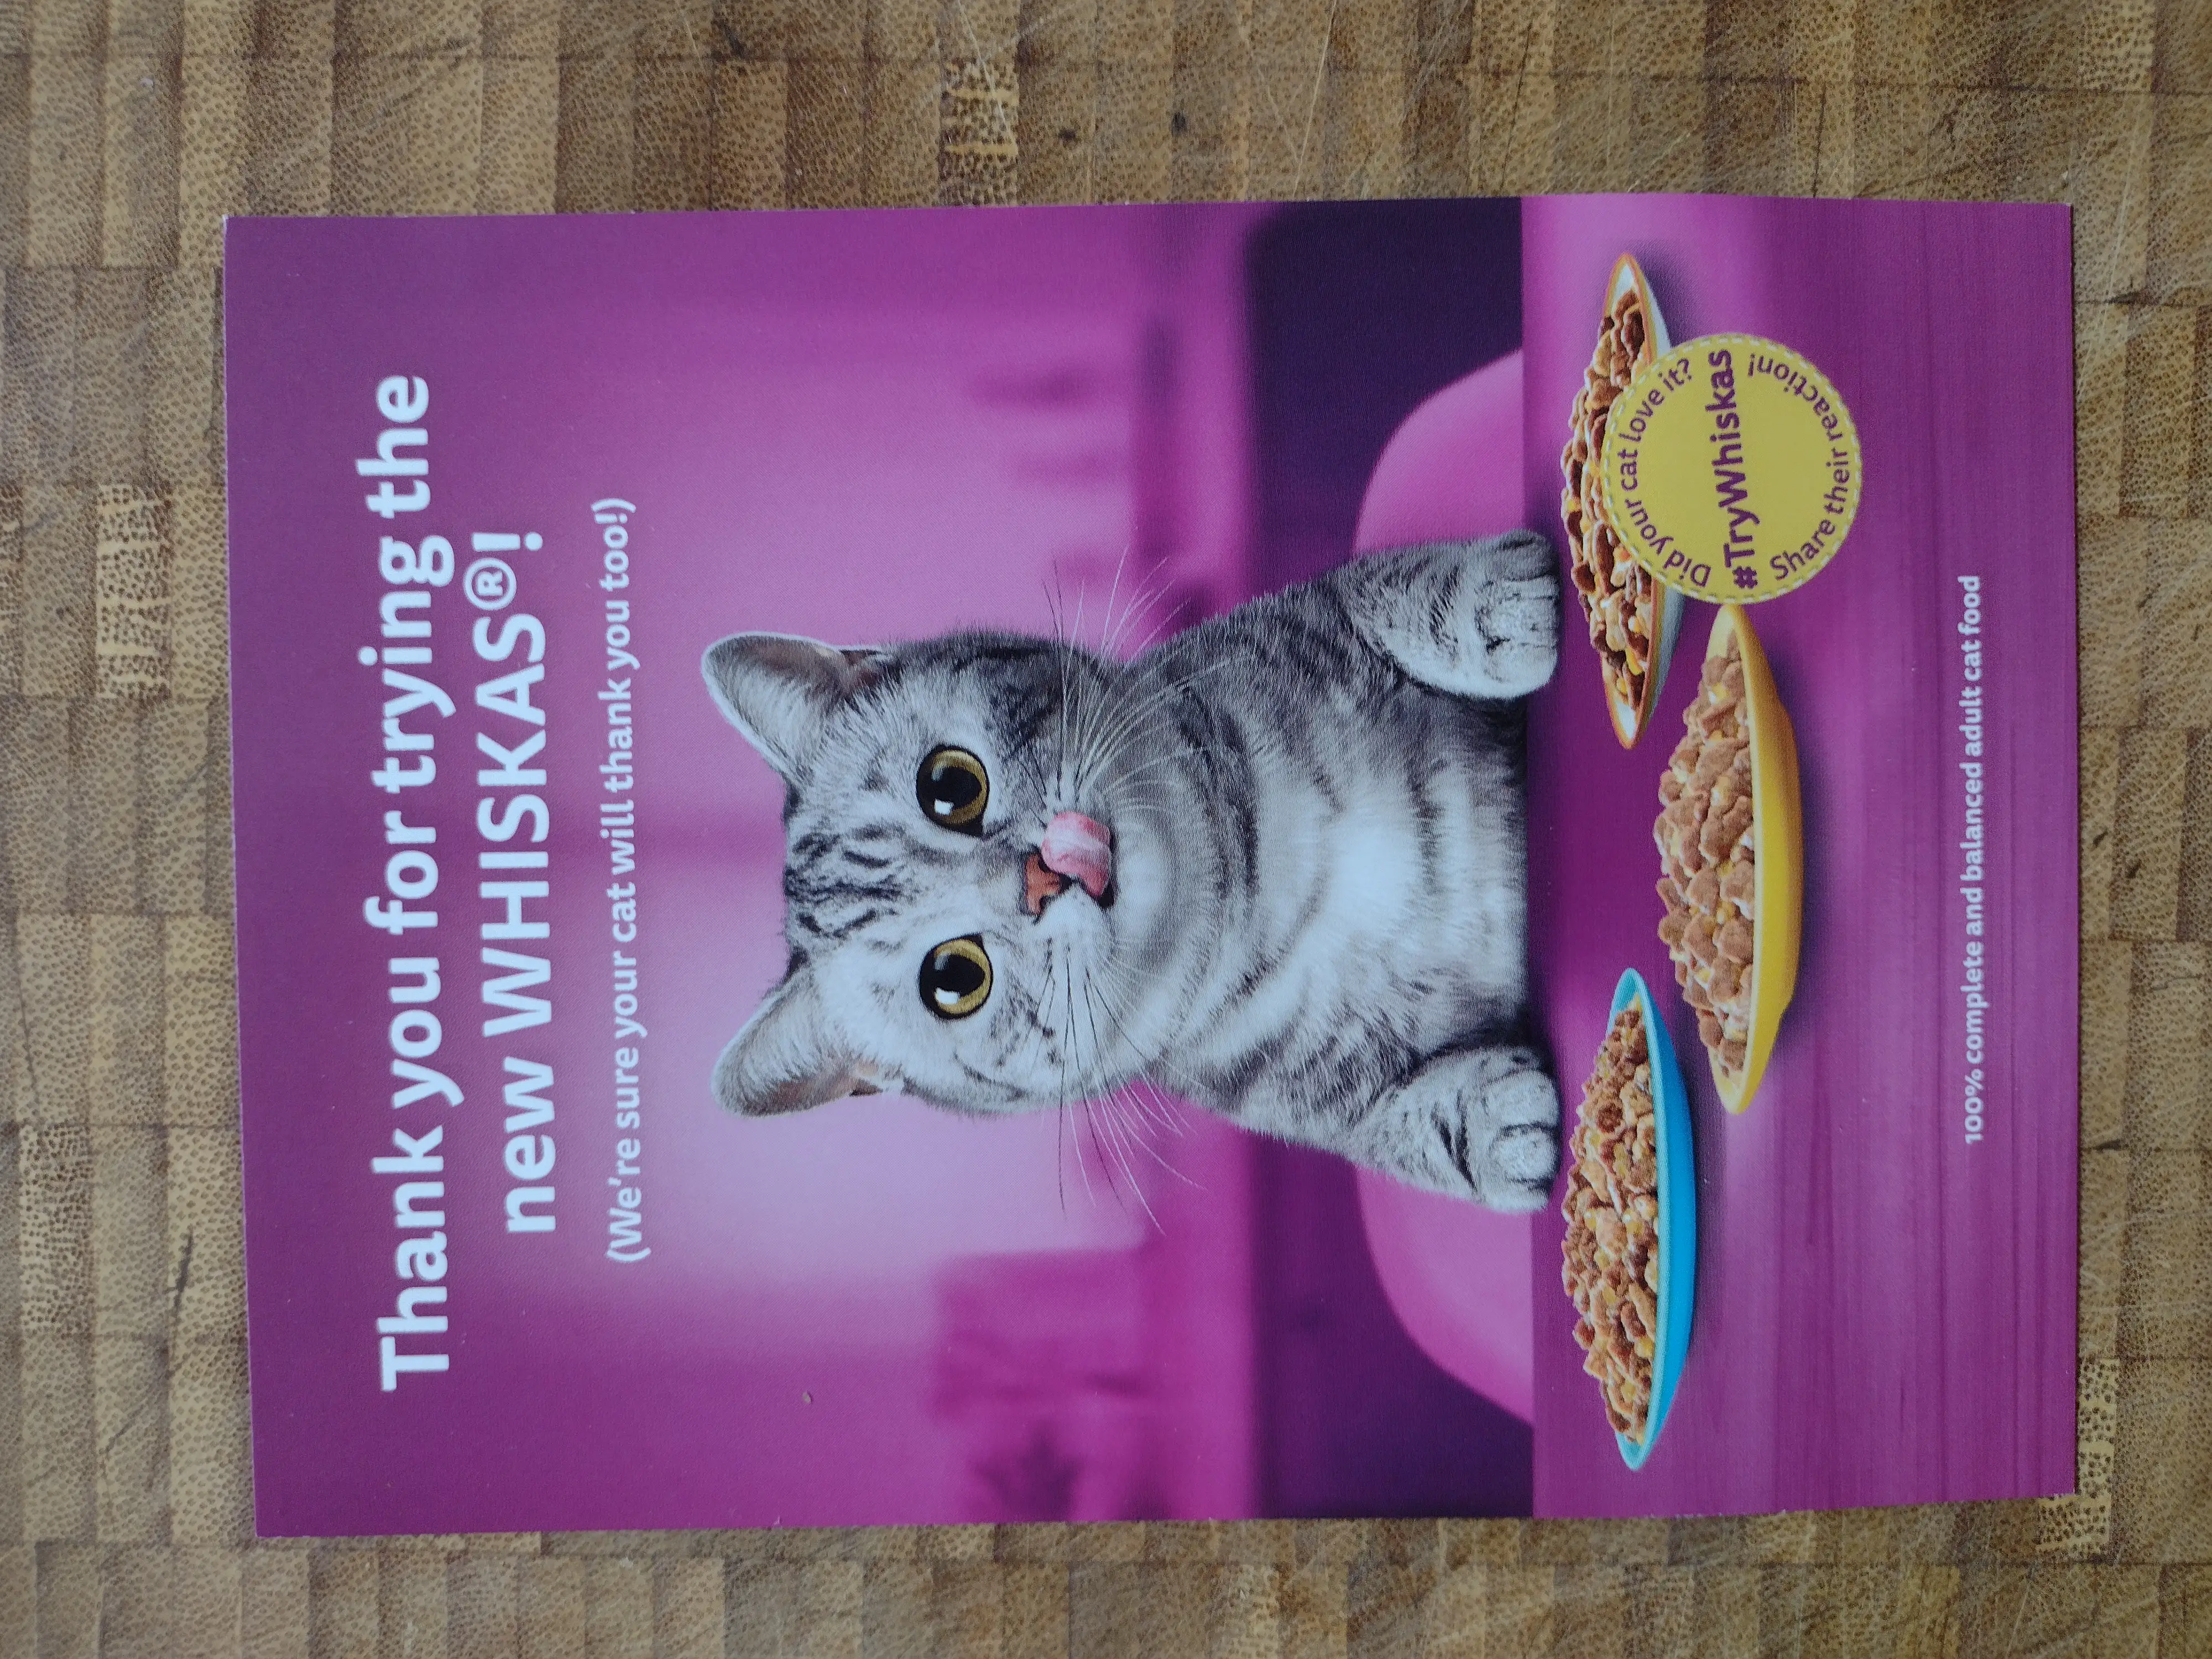 leaflet Receiving & Reviewing my FREE Sample of Whiskas Cat Food save money deal offer discount promotion review flavour pouch sachet jelly post mail delivery freebies packaging cardboard box flyer hashtag size wet brand website